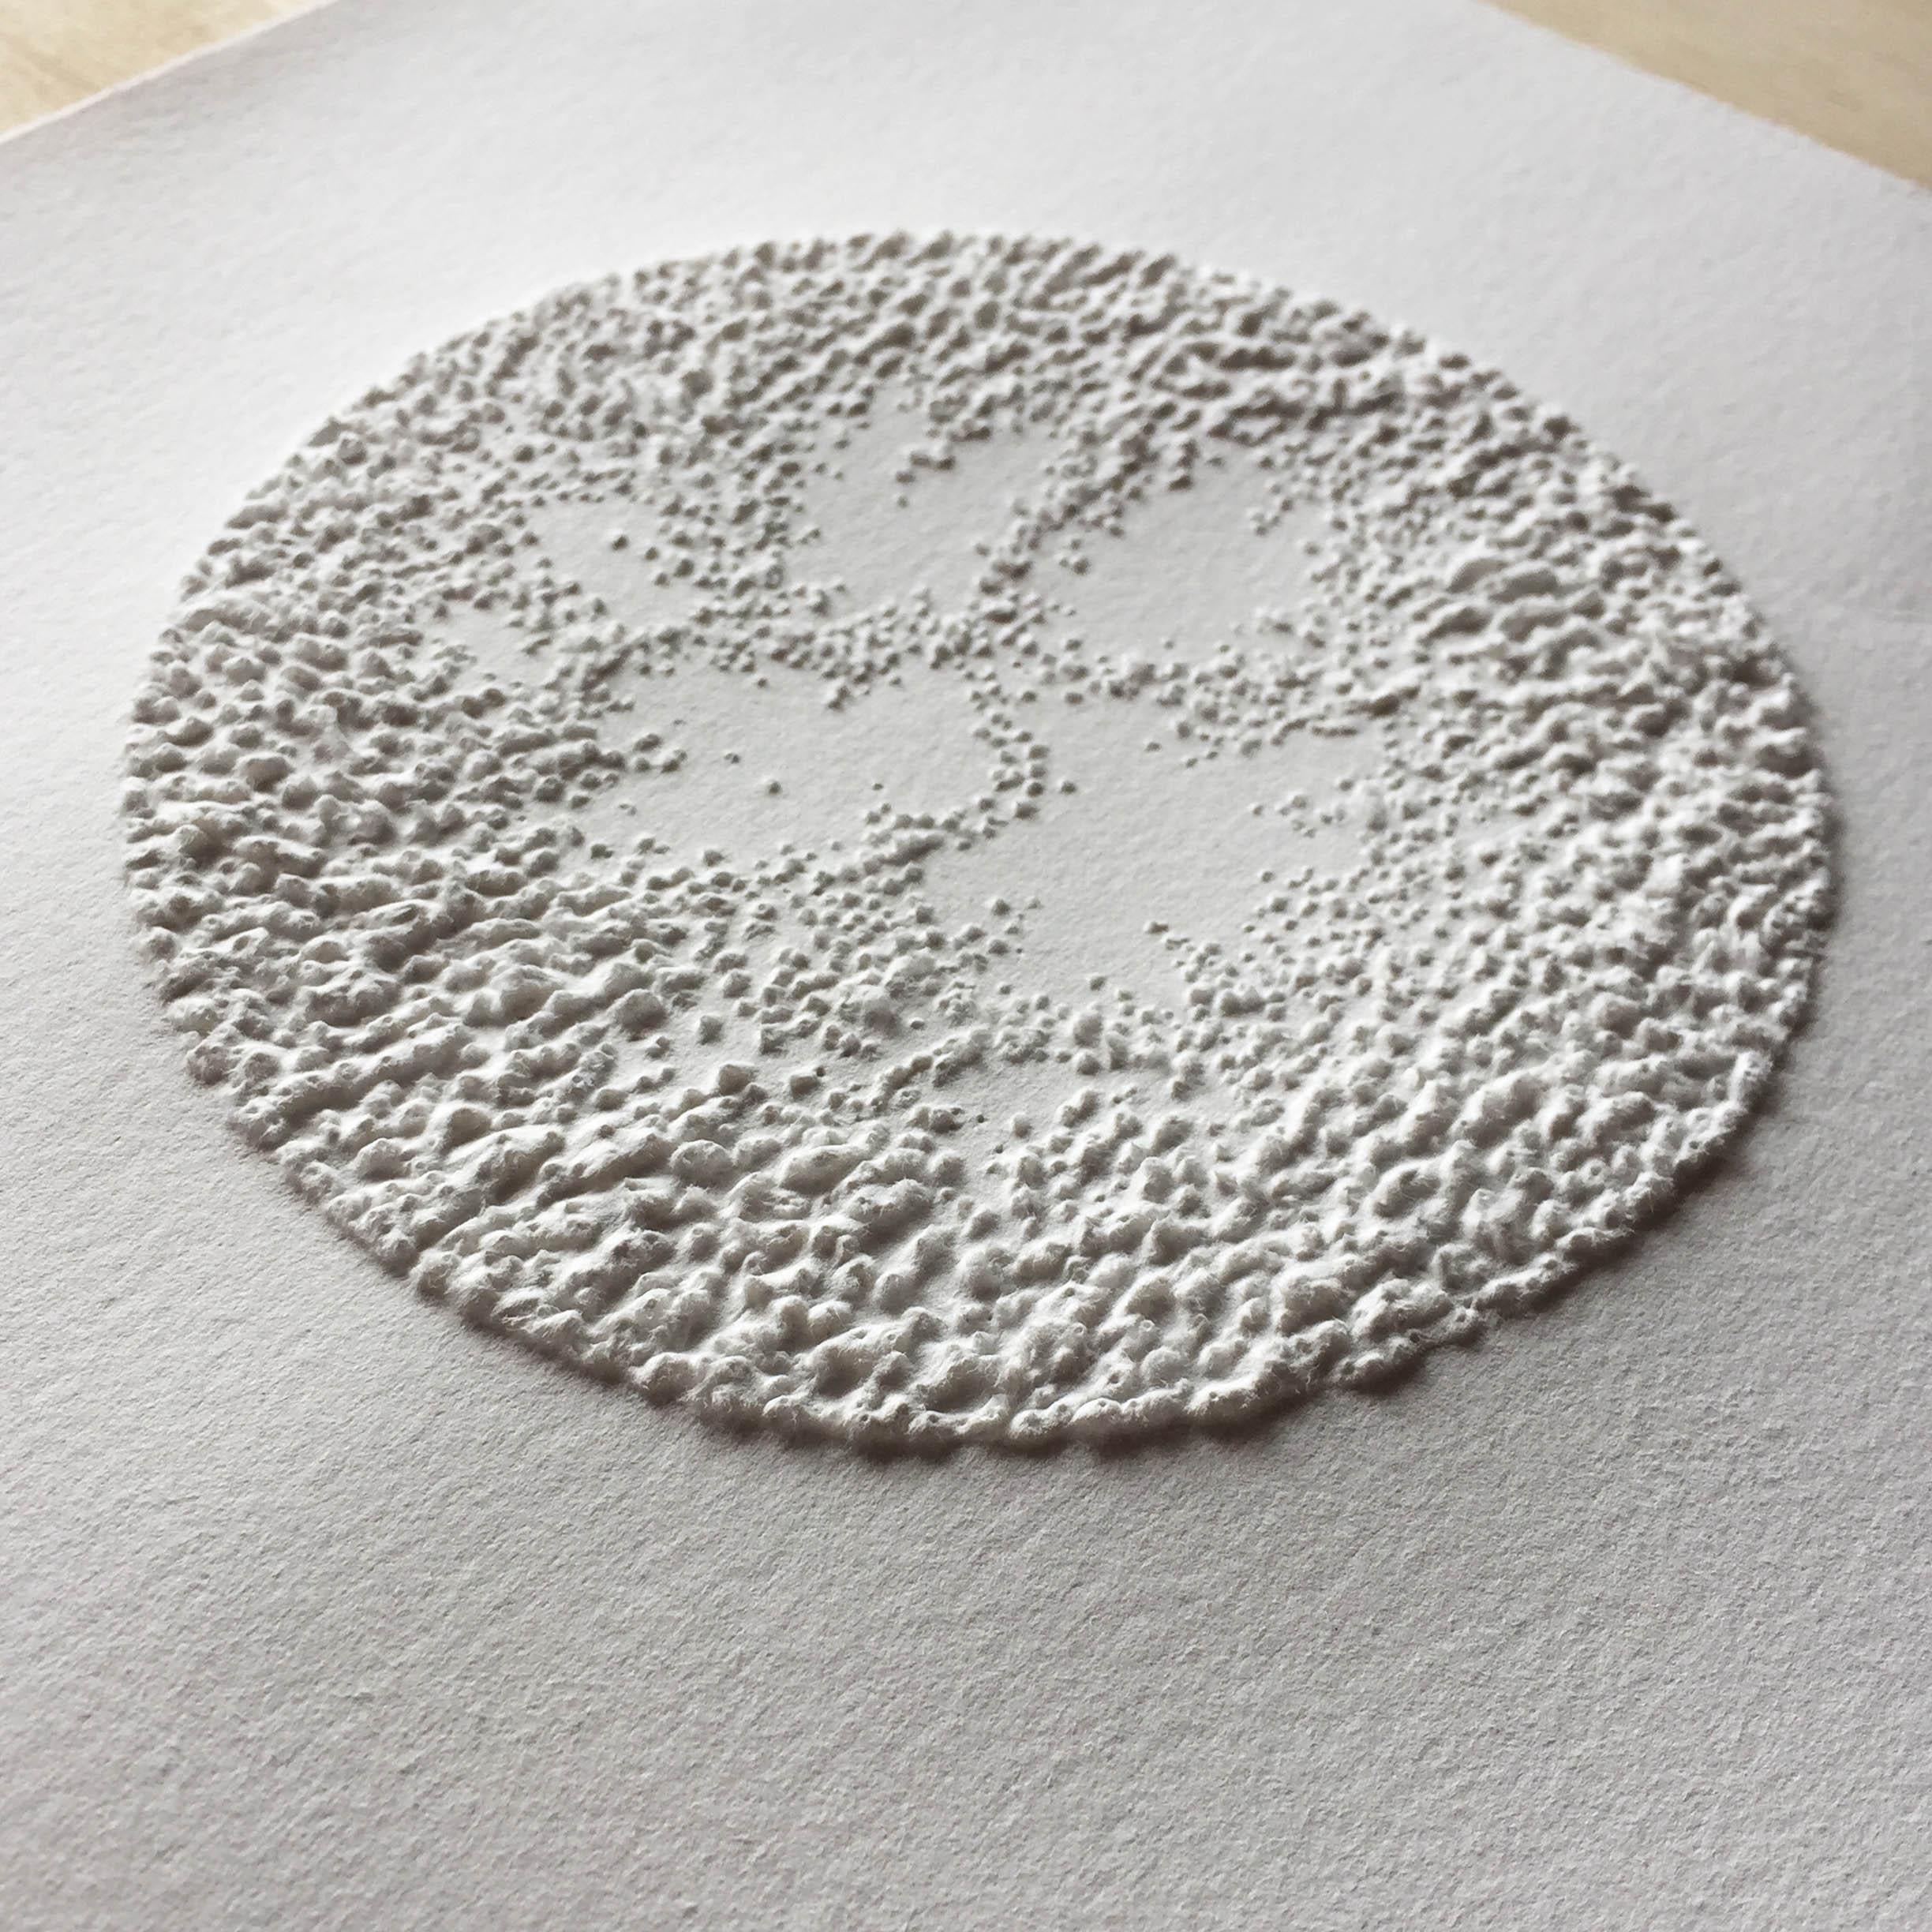 Circle 1 - intricate white 3D abstract geometric drypoint drawing on paper  - Art by Antonin Anzil